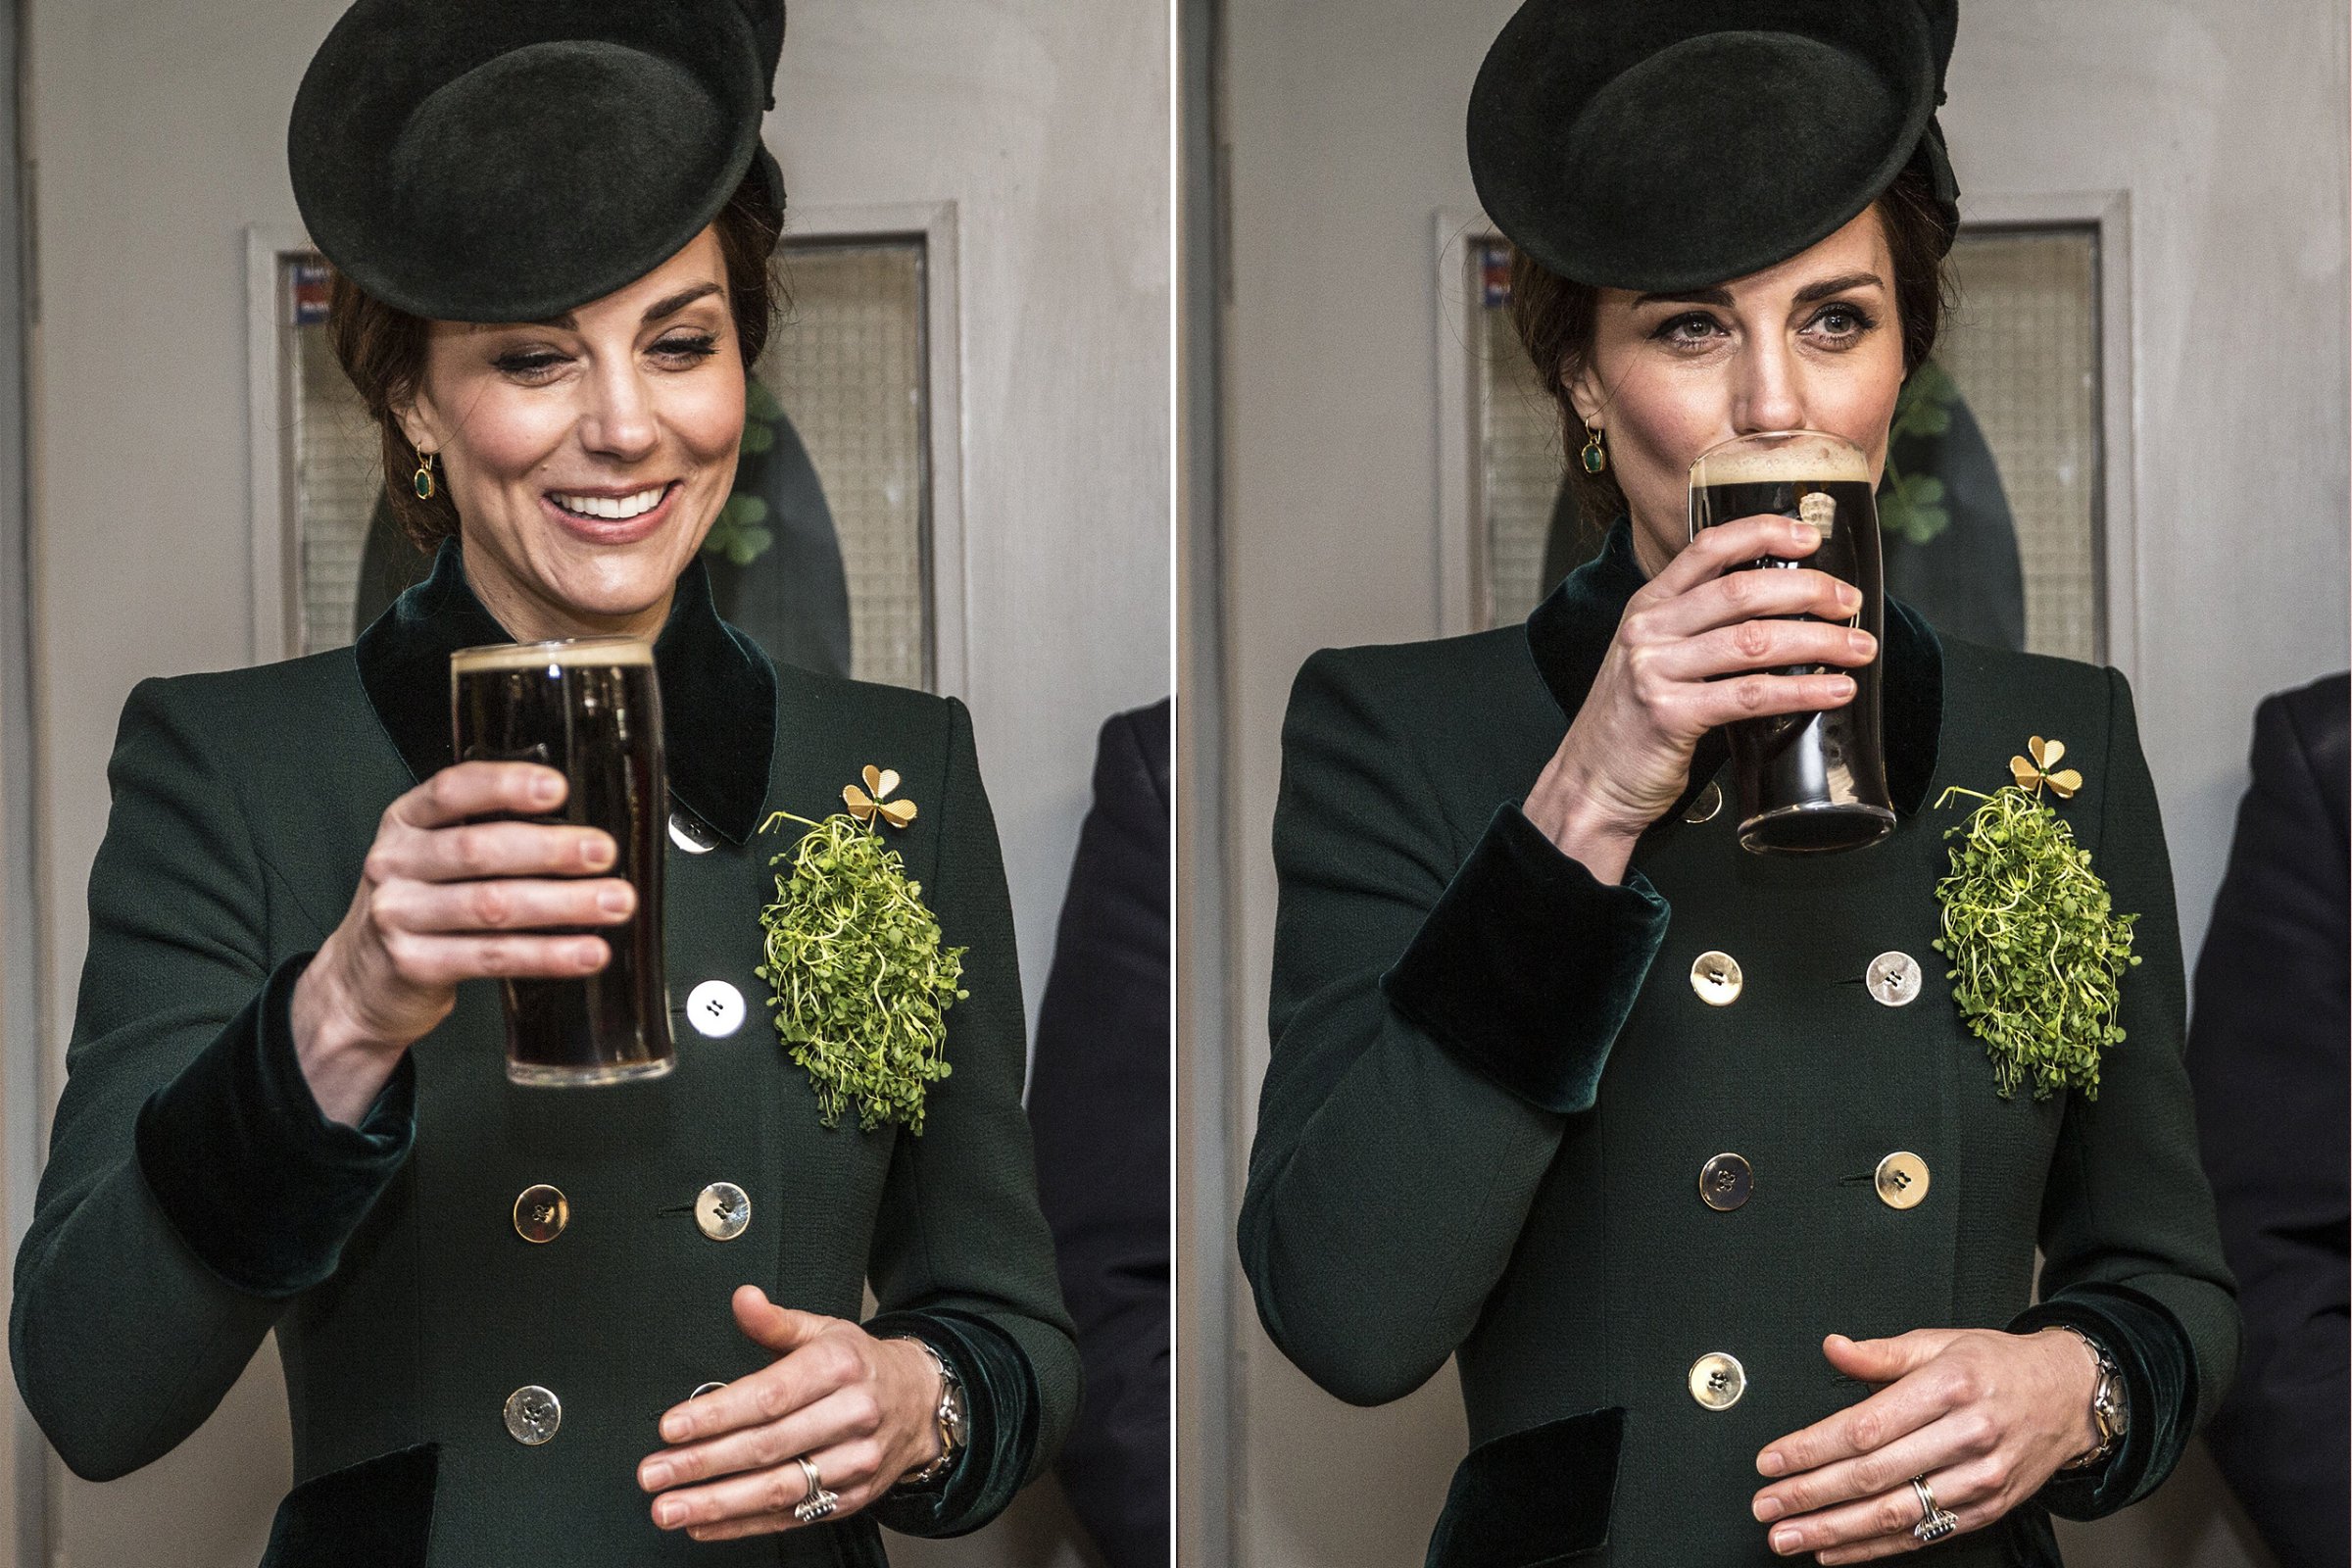 Duchess of Cambridge drinks a pint of Guinness during a meet and greet with soldiers of the 1st Battalion Irish Guards in their canteen following their St. Patrick's Day parade at Cavalry Barracks, Hounslow, on March 17, 2017.